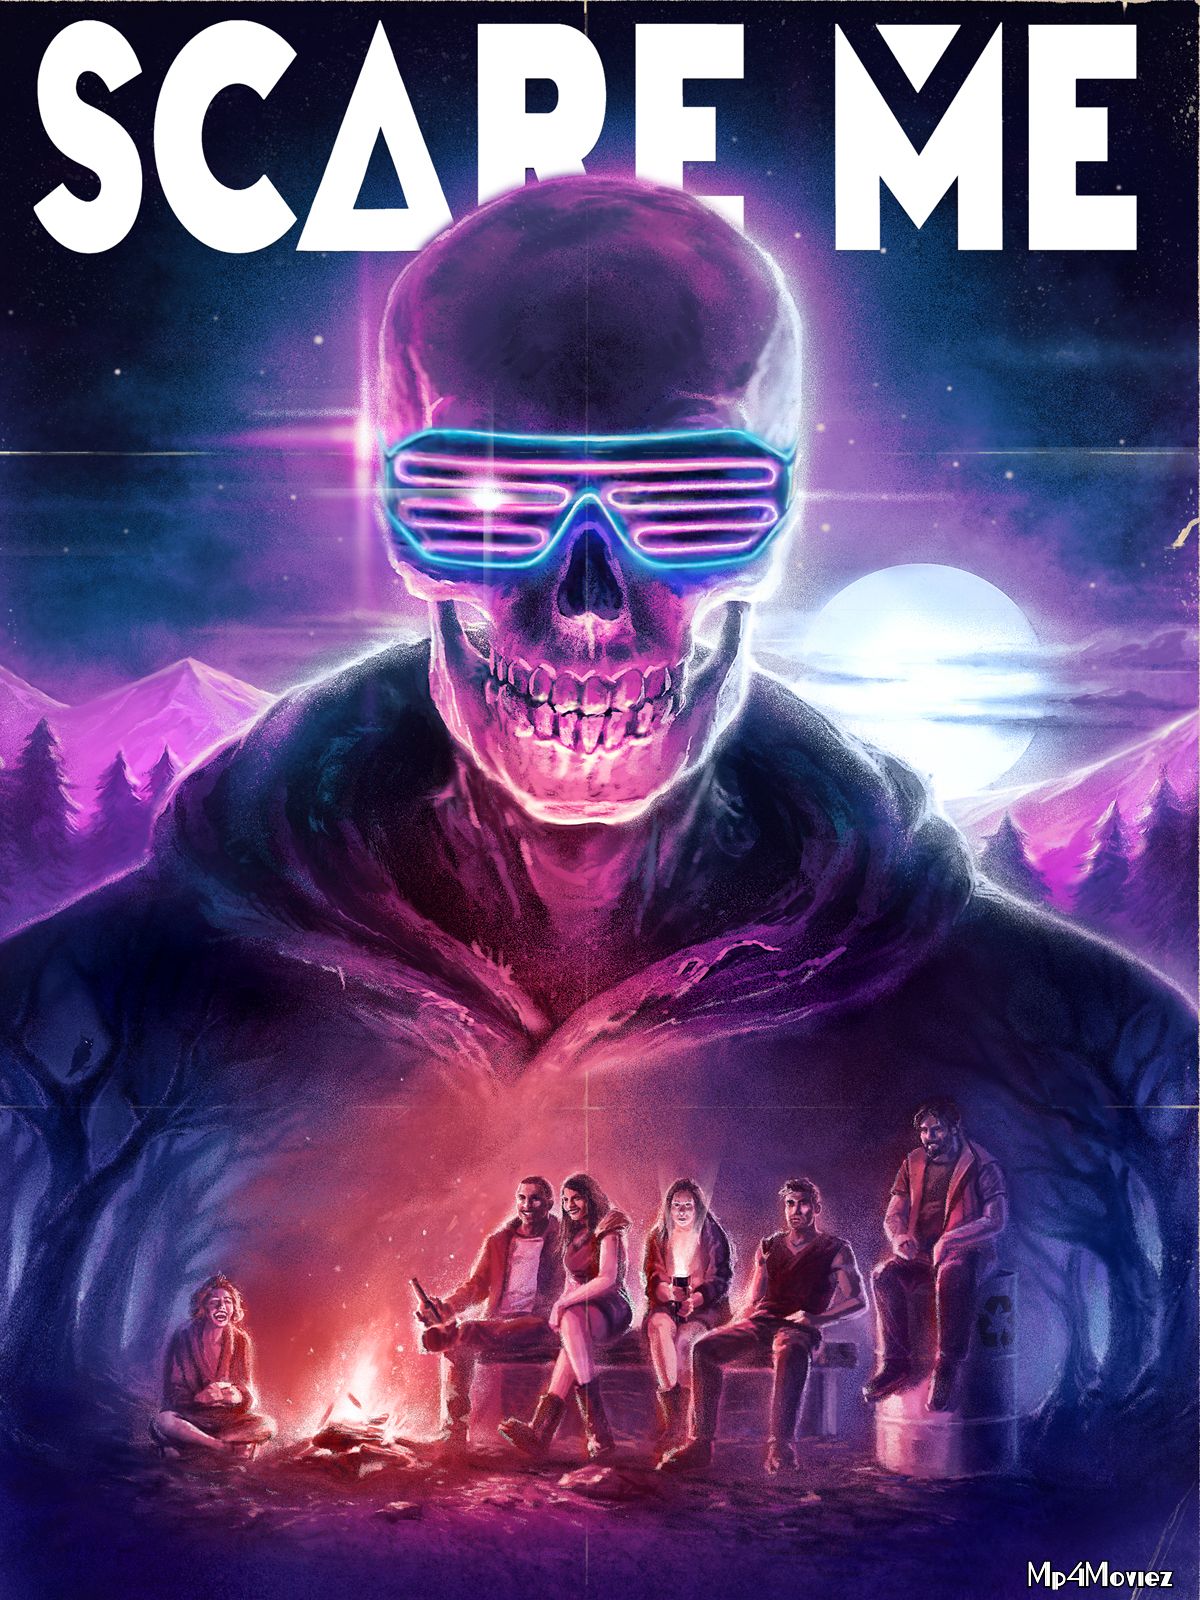 Scare Me 2020 Hindi Dubbed Full Movie download full movie